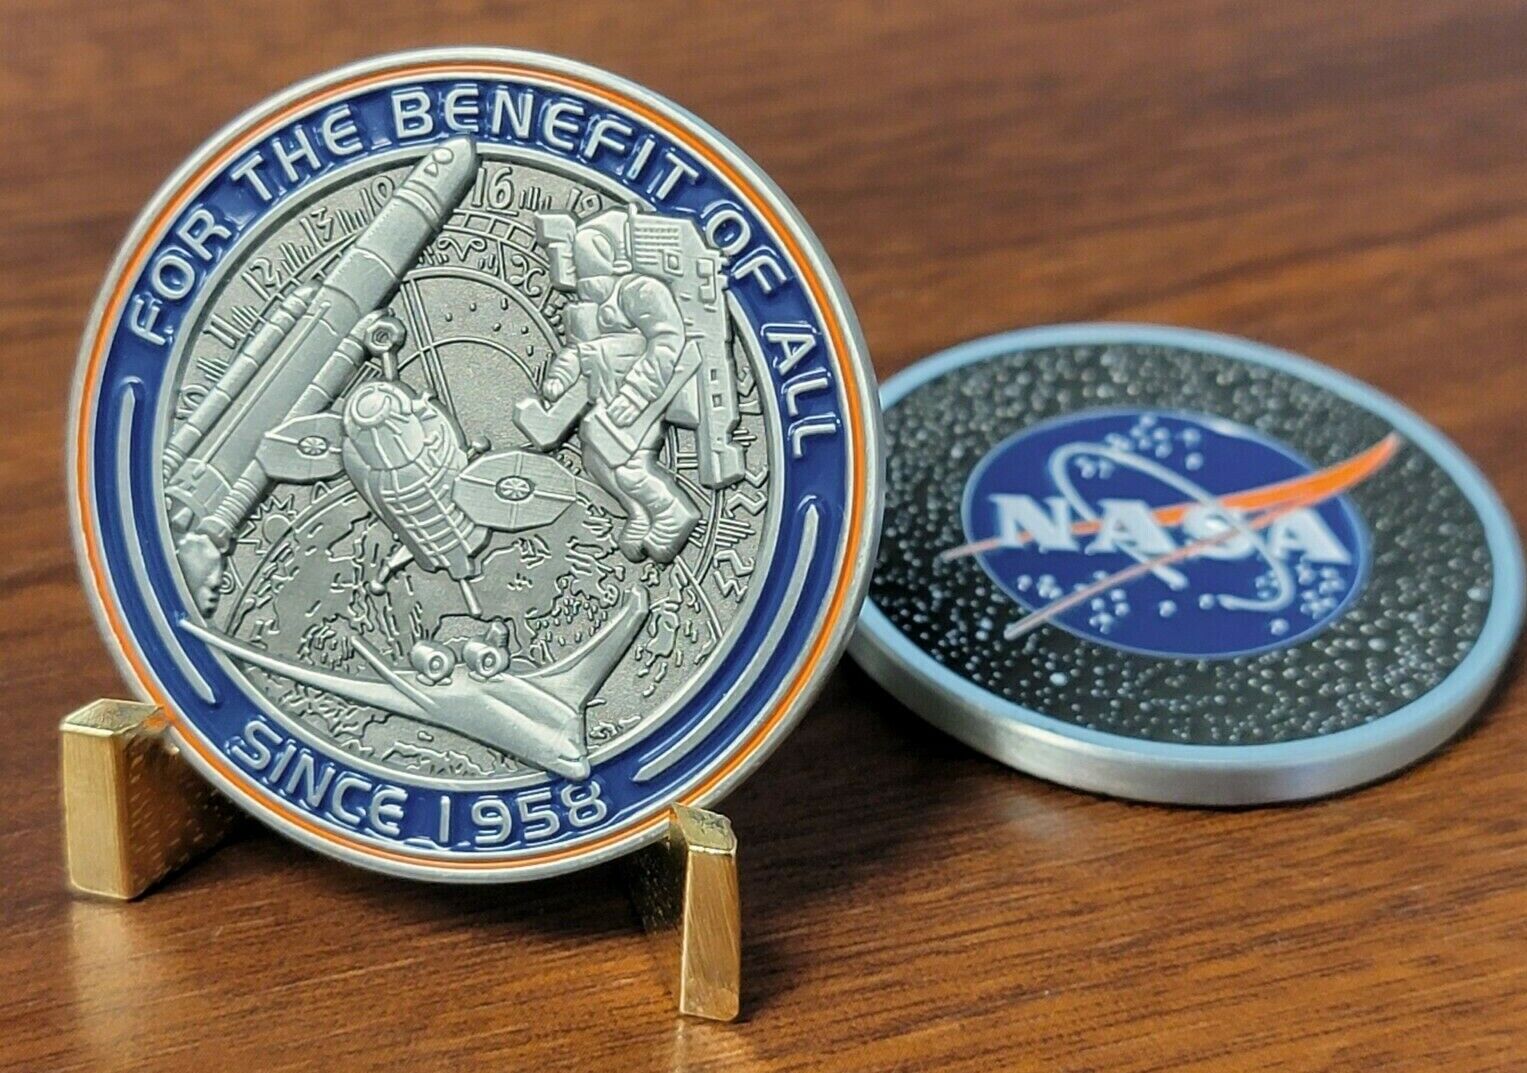 NASA Logo Challenge Coin - For the Benefit of All *New*